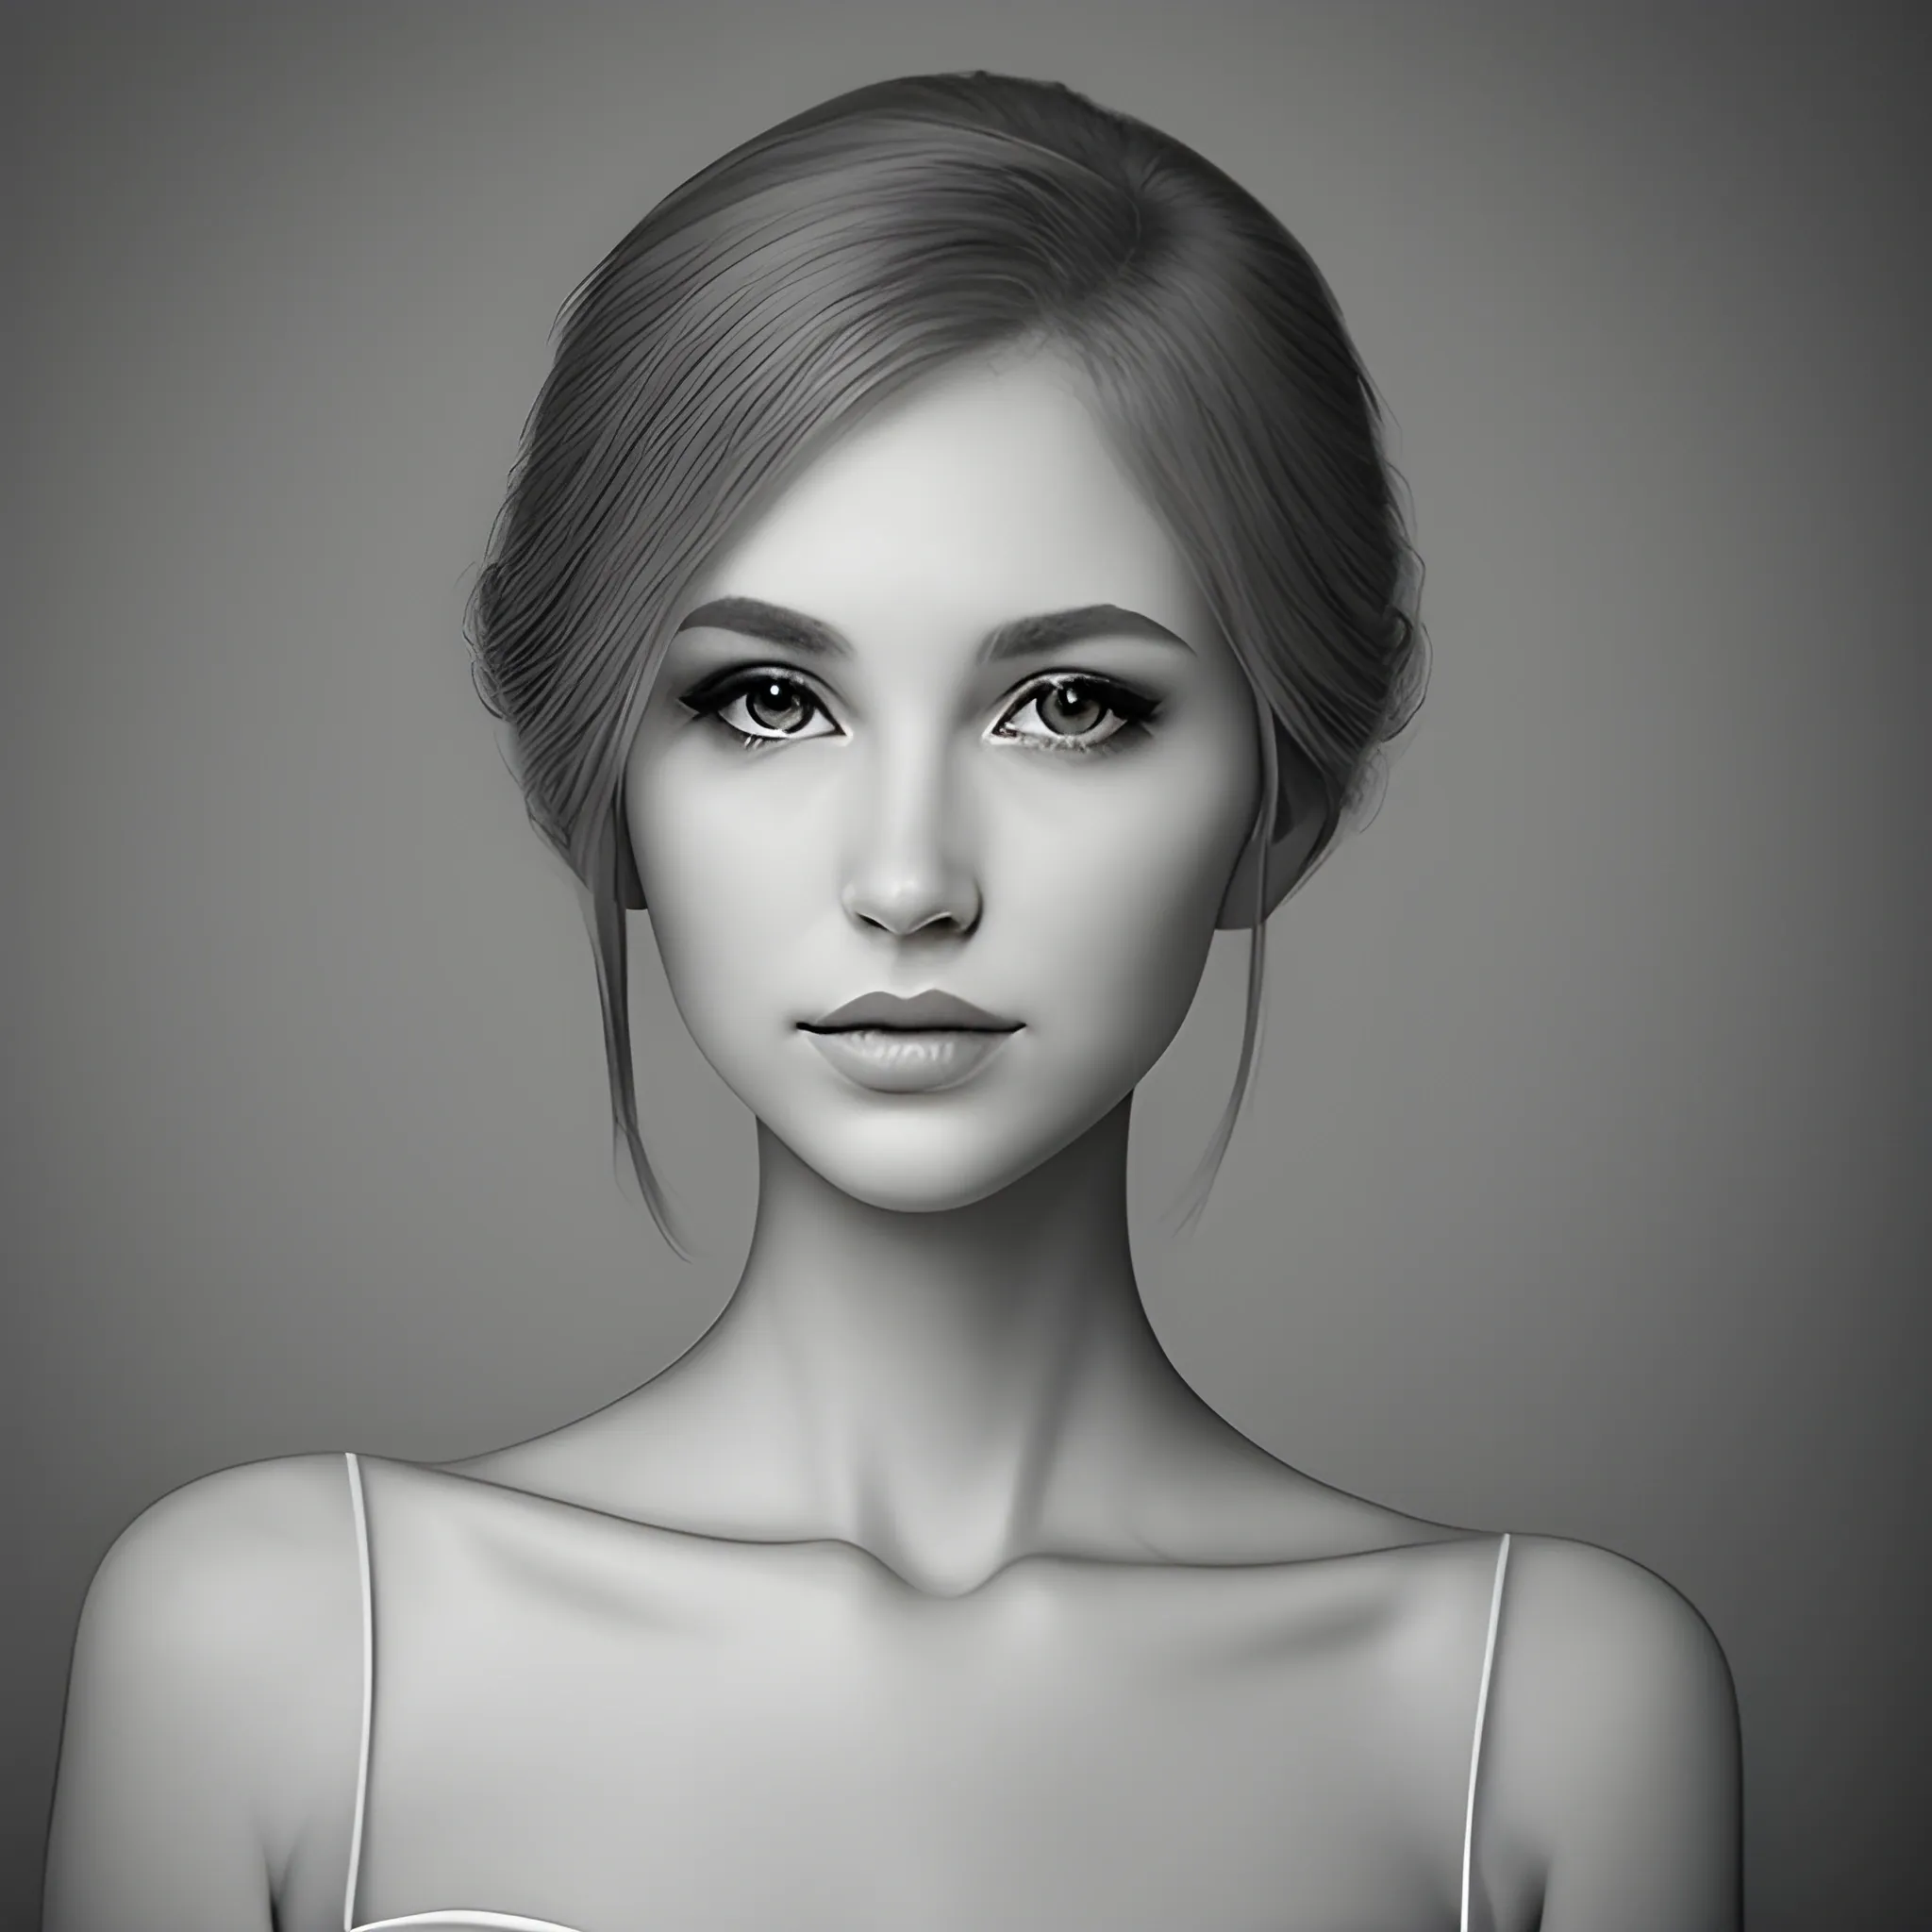 Portrait of beautiful woman, gray tones, solemn and elegant, professional photography